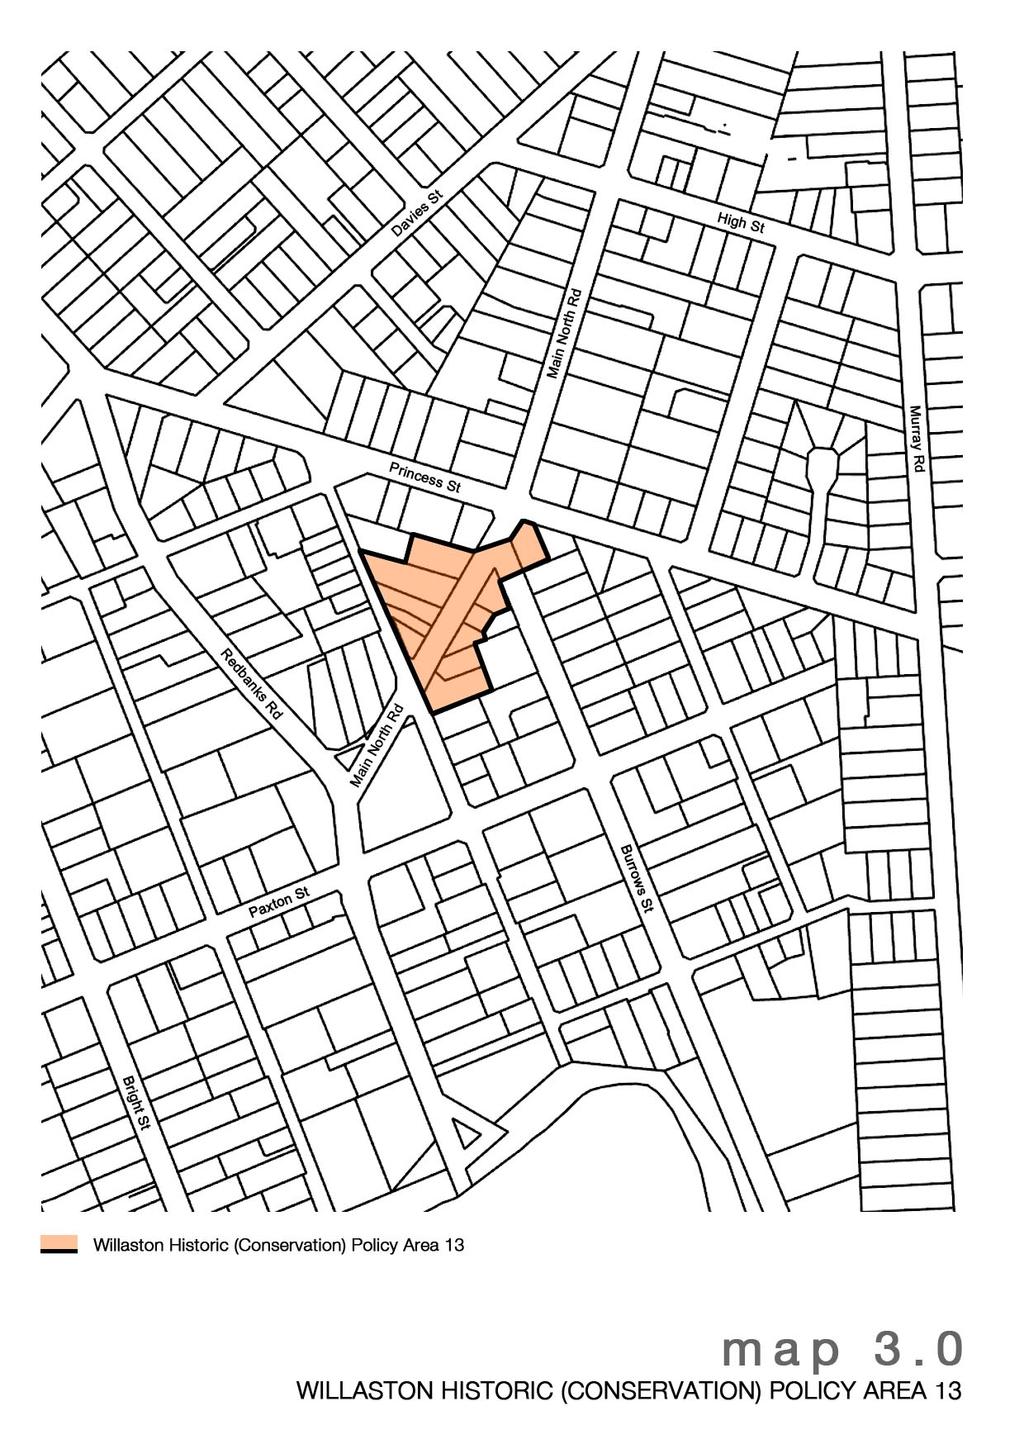 1.5.2 Willaston Historic (Conservation) Policy Area 13 Significance Located adjacent to the main township of Willaston, which was laid out in 1848, the predominately residential buildings found